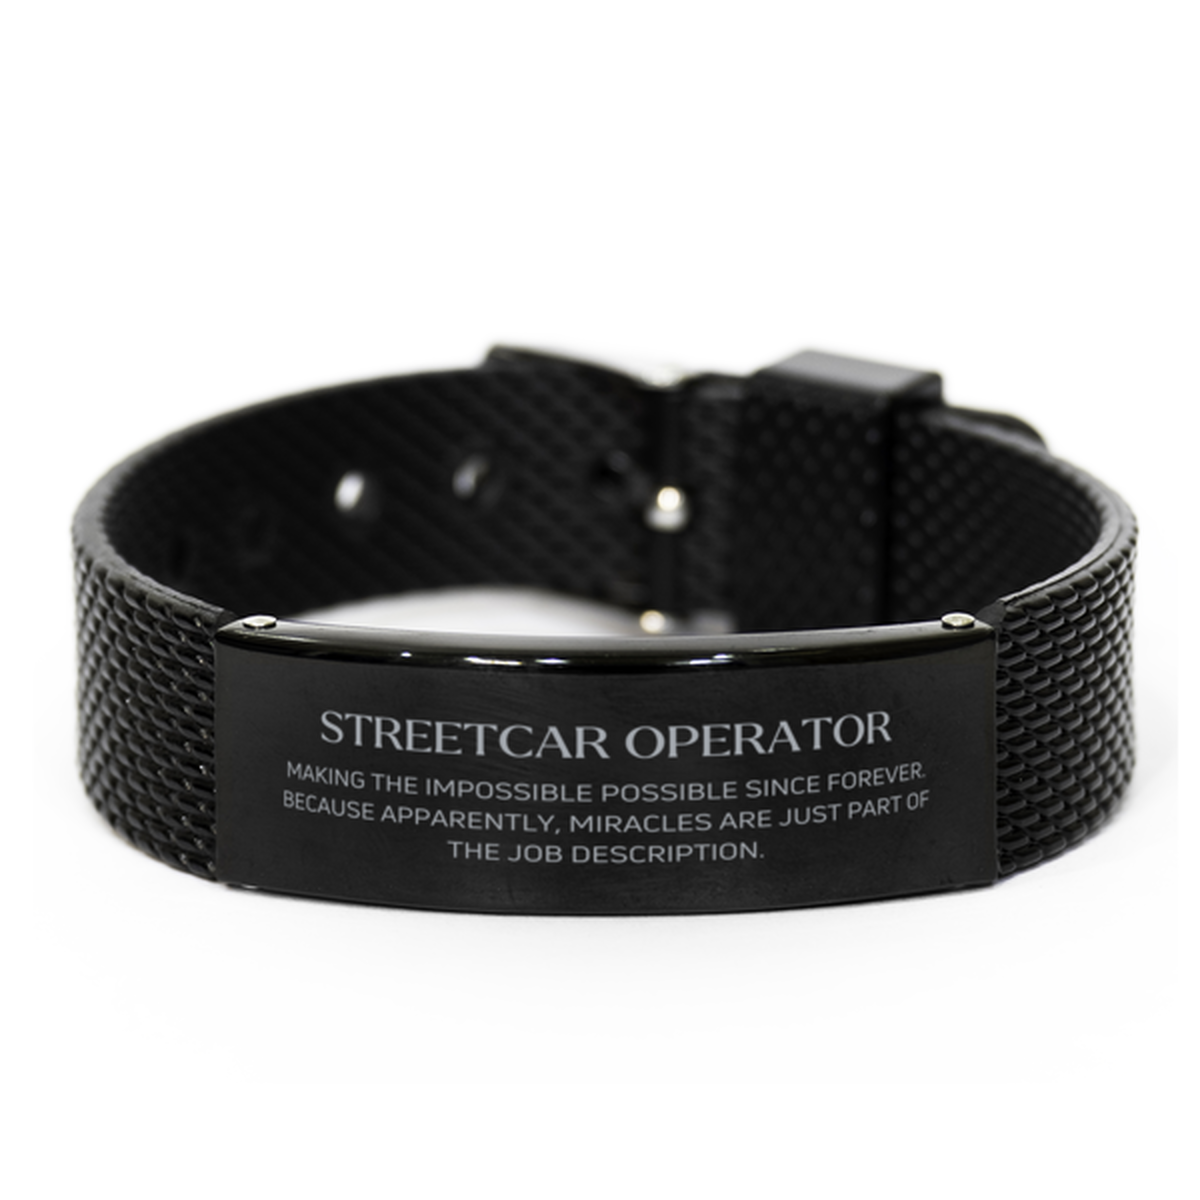 Funny Streetcar Operator Gifts, Miracles are just part of the job description, Inspirational Birthday Black Shark Mesh Bracelet For Streetcar Operator, Men, Women, Coworkers, Friends, Boss